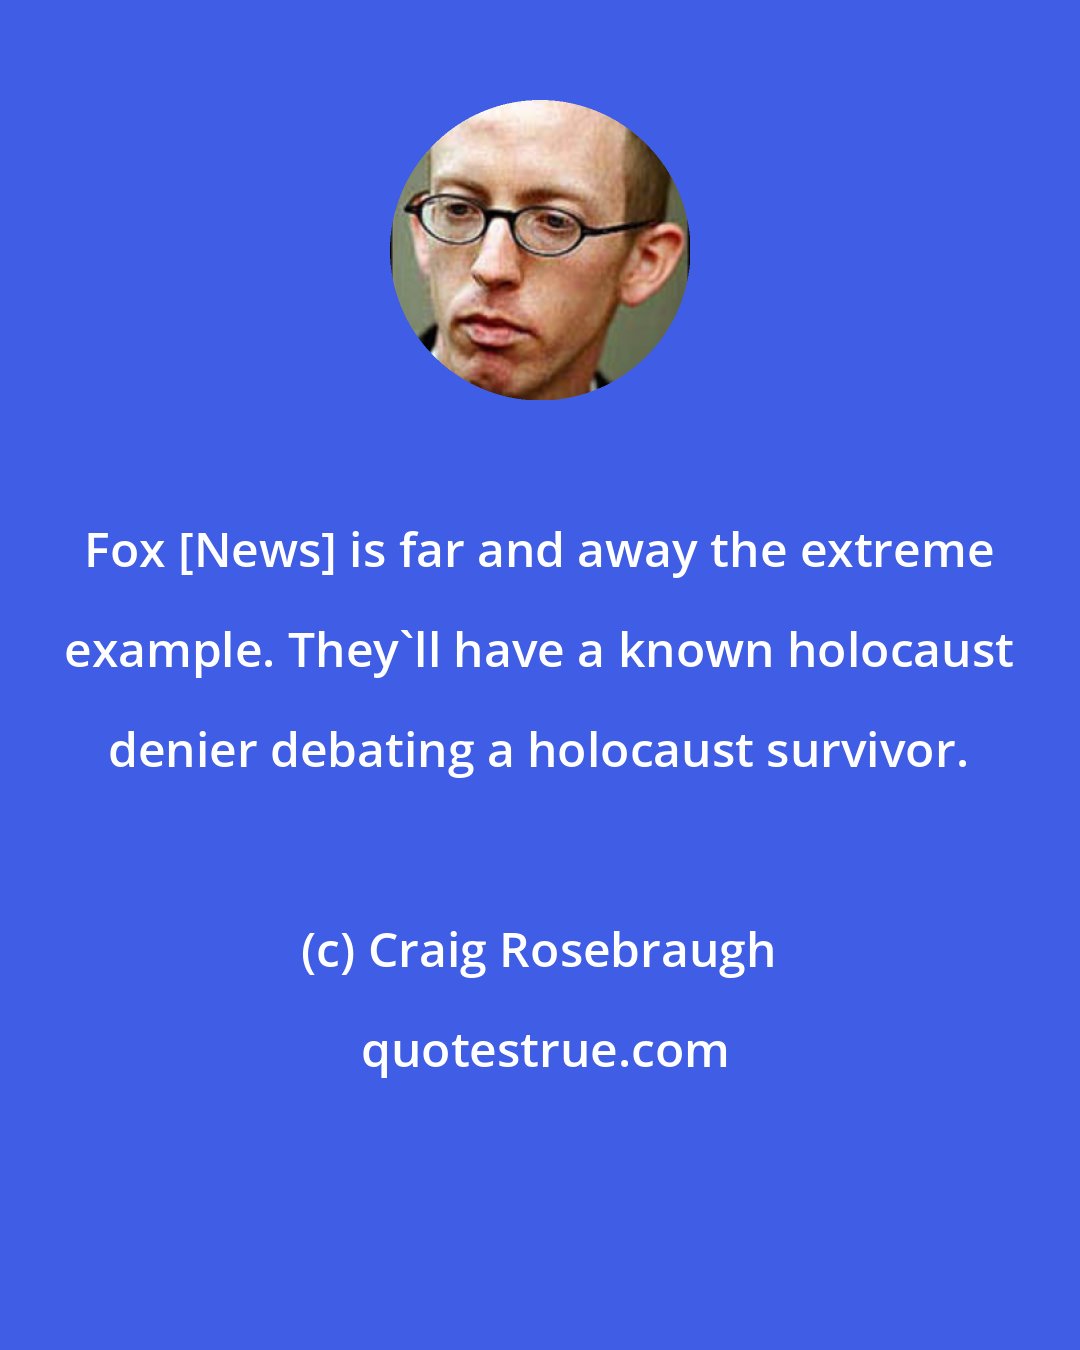 Craig Rosebraugh: Fox [News] is far and away the extreme example. They'll have a known holocaust denier debating a holocaust survivor.